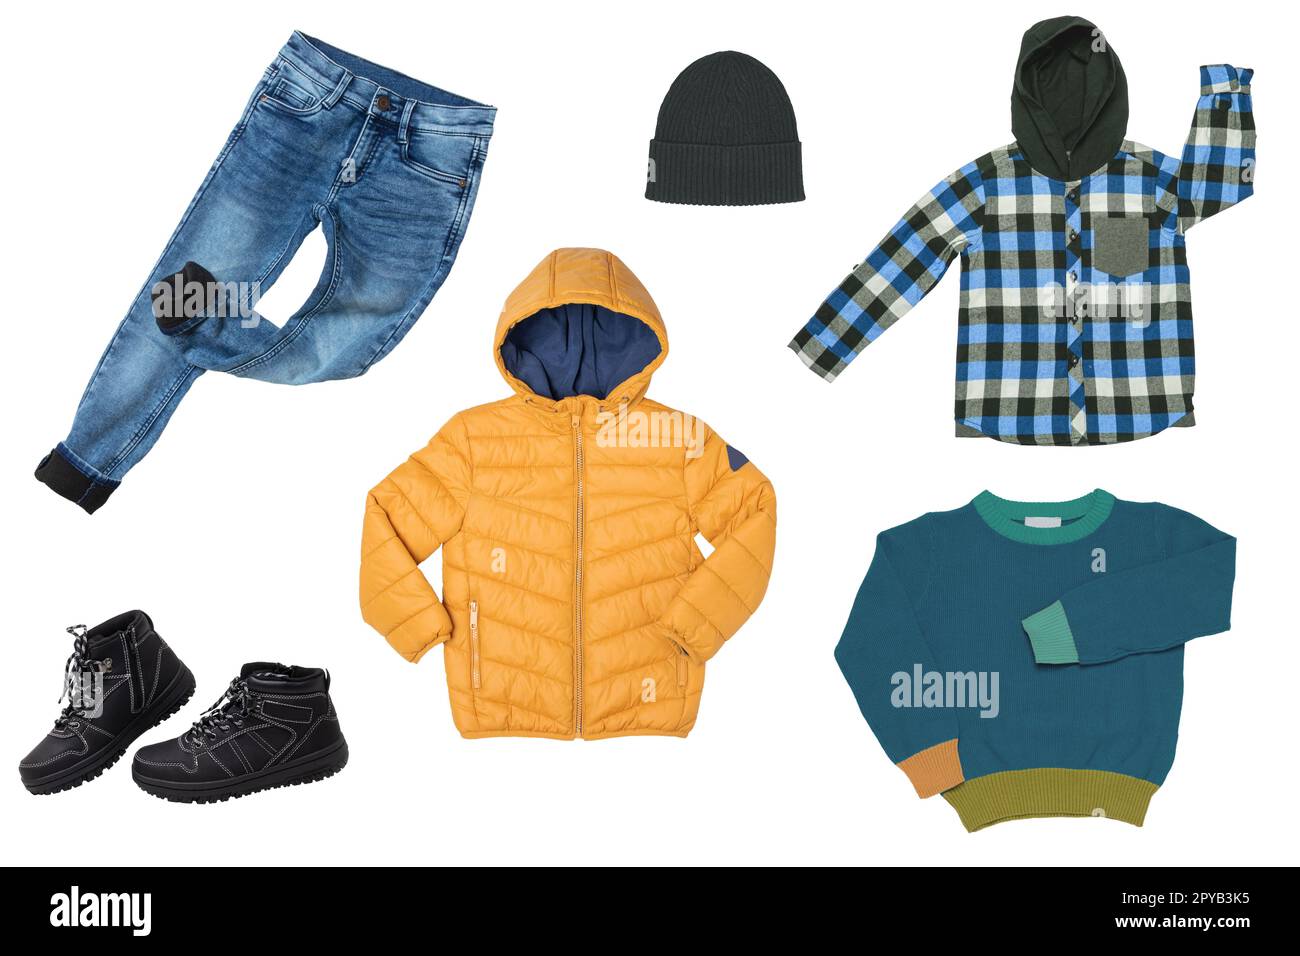 Collage set of boys spring winter clothes isolated. Male kids apparel collection. Child boy fashion clothing outfit. Colorful stylish jeans, sweater, pants, jackets, boots wearing. Stock Photo